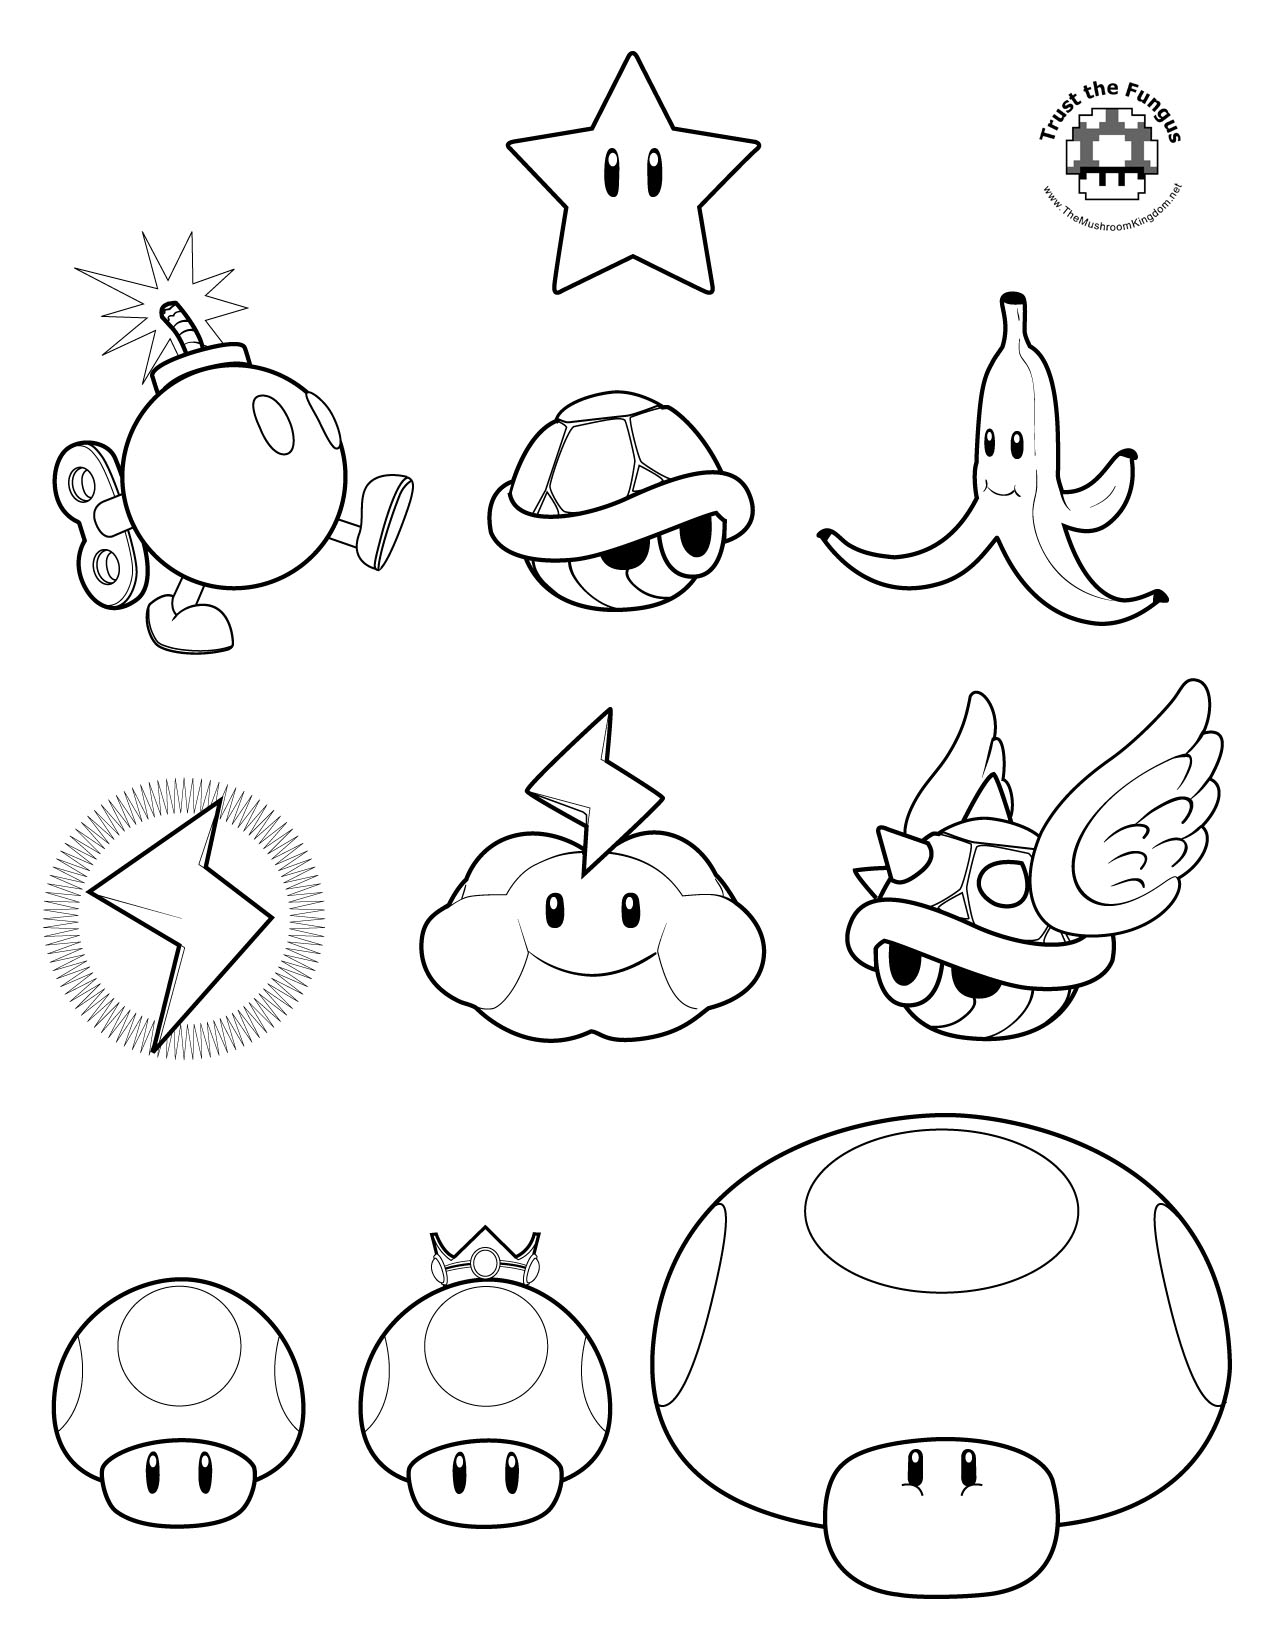 King Koopa Coloring Pages at GetColorings.com | Free printable